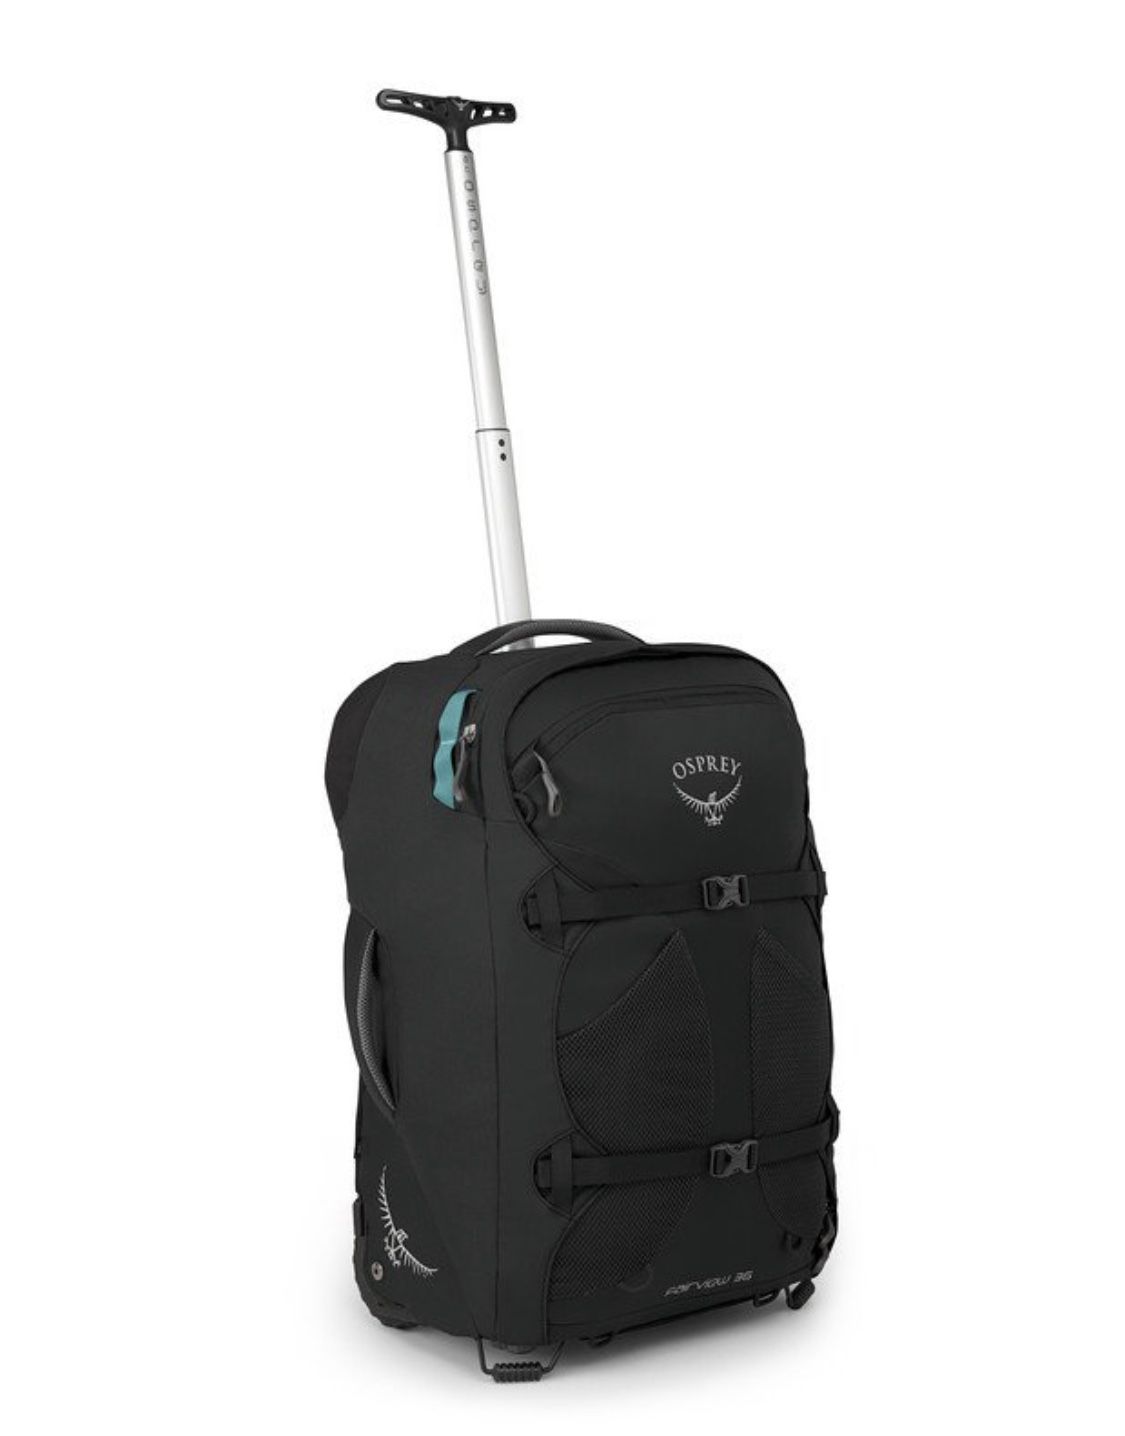 Osprey Fairview 36 Travel Bag Backpack Luggage